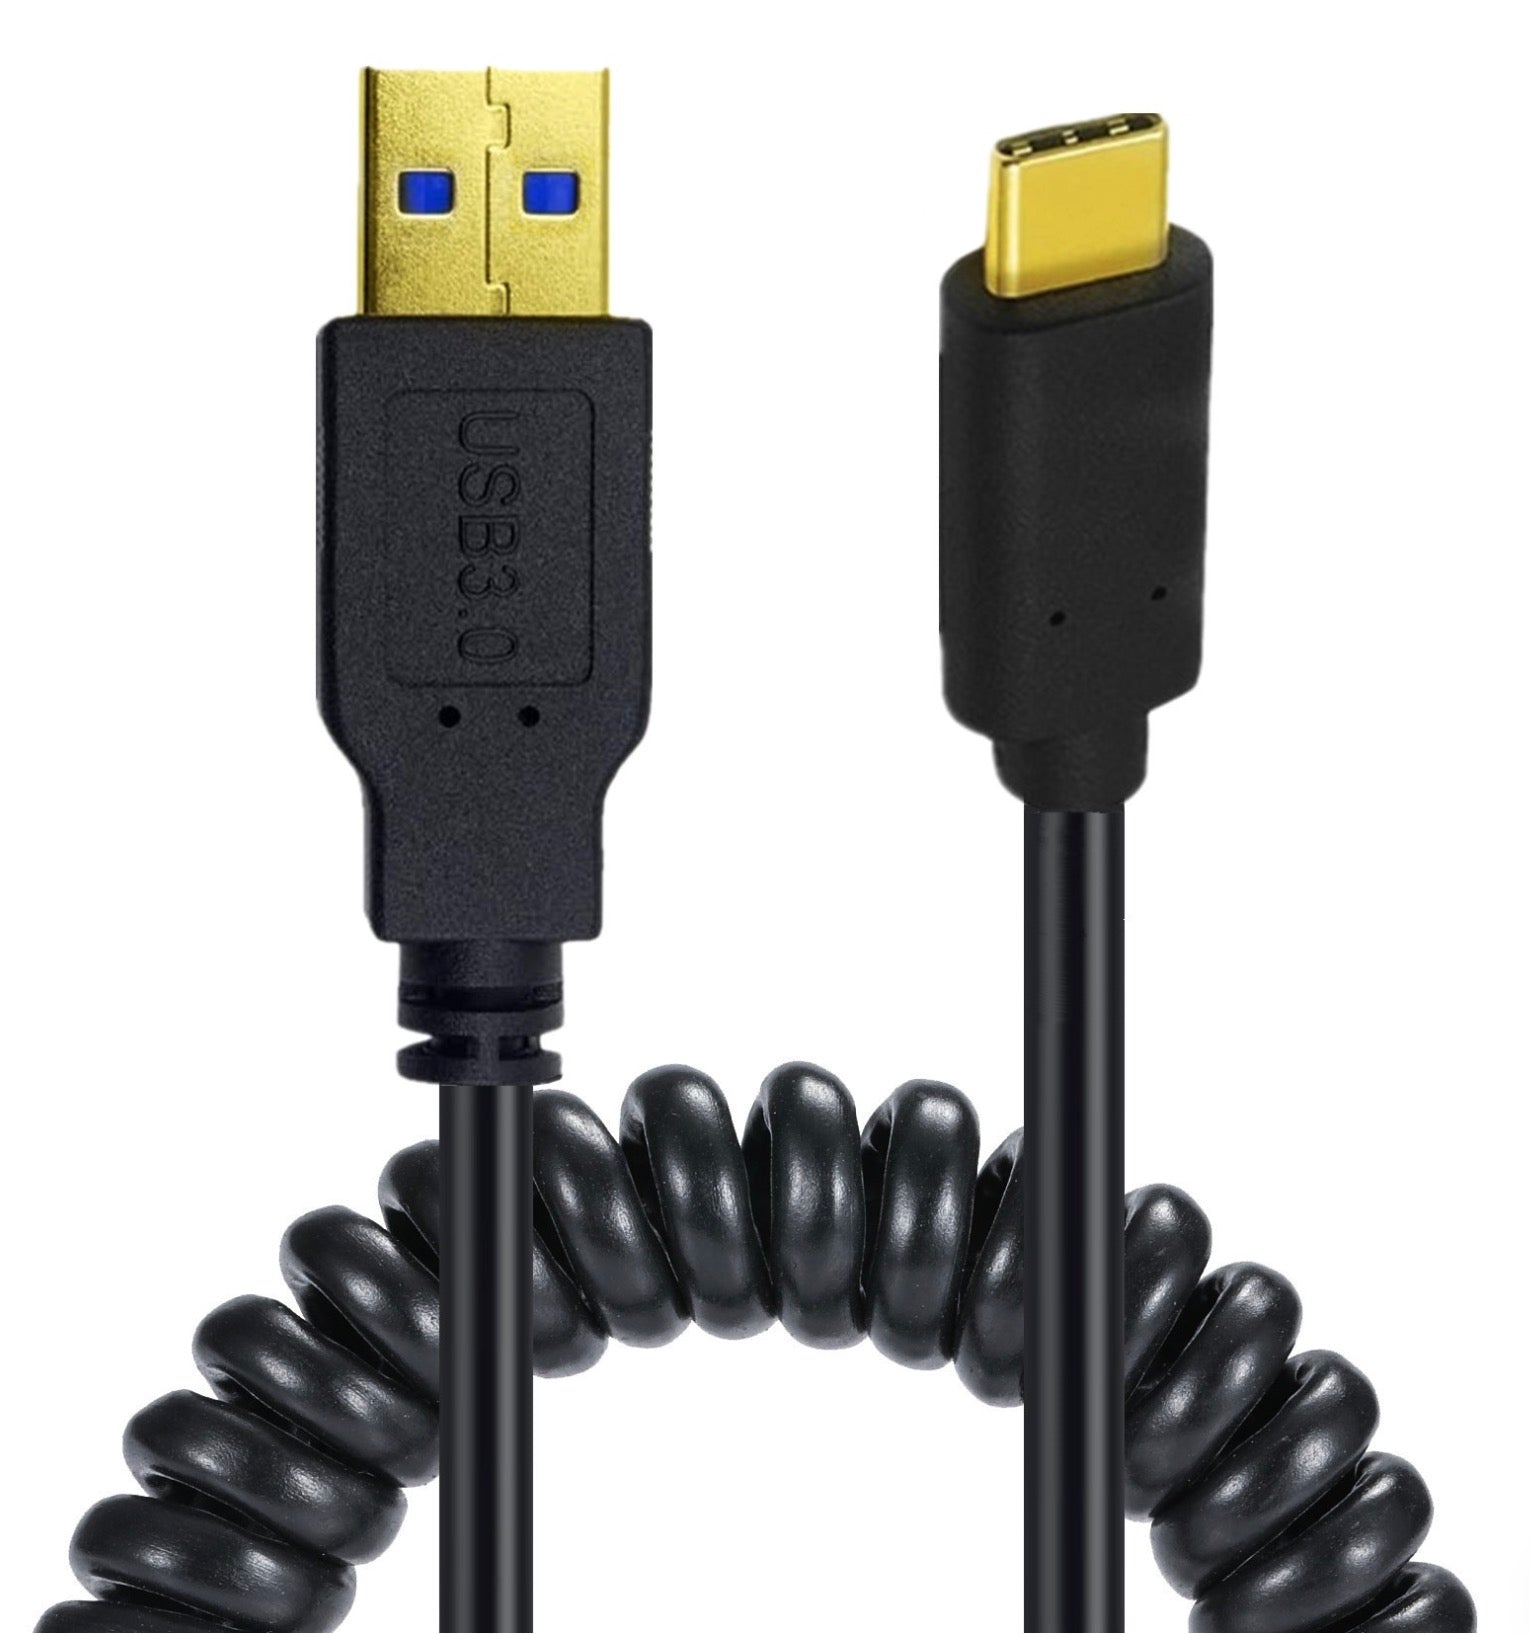 USB C Type-C Male to USB 3.0 A Male Spiral Cable